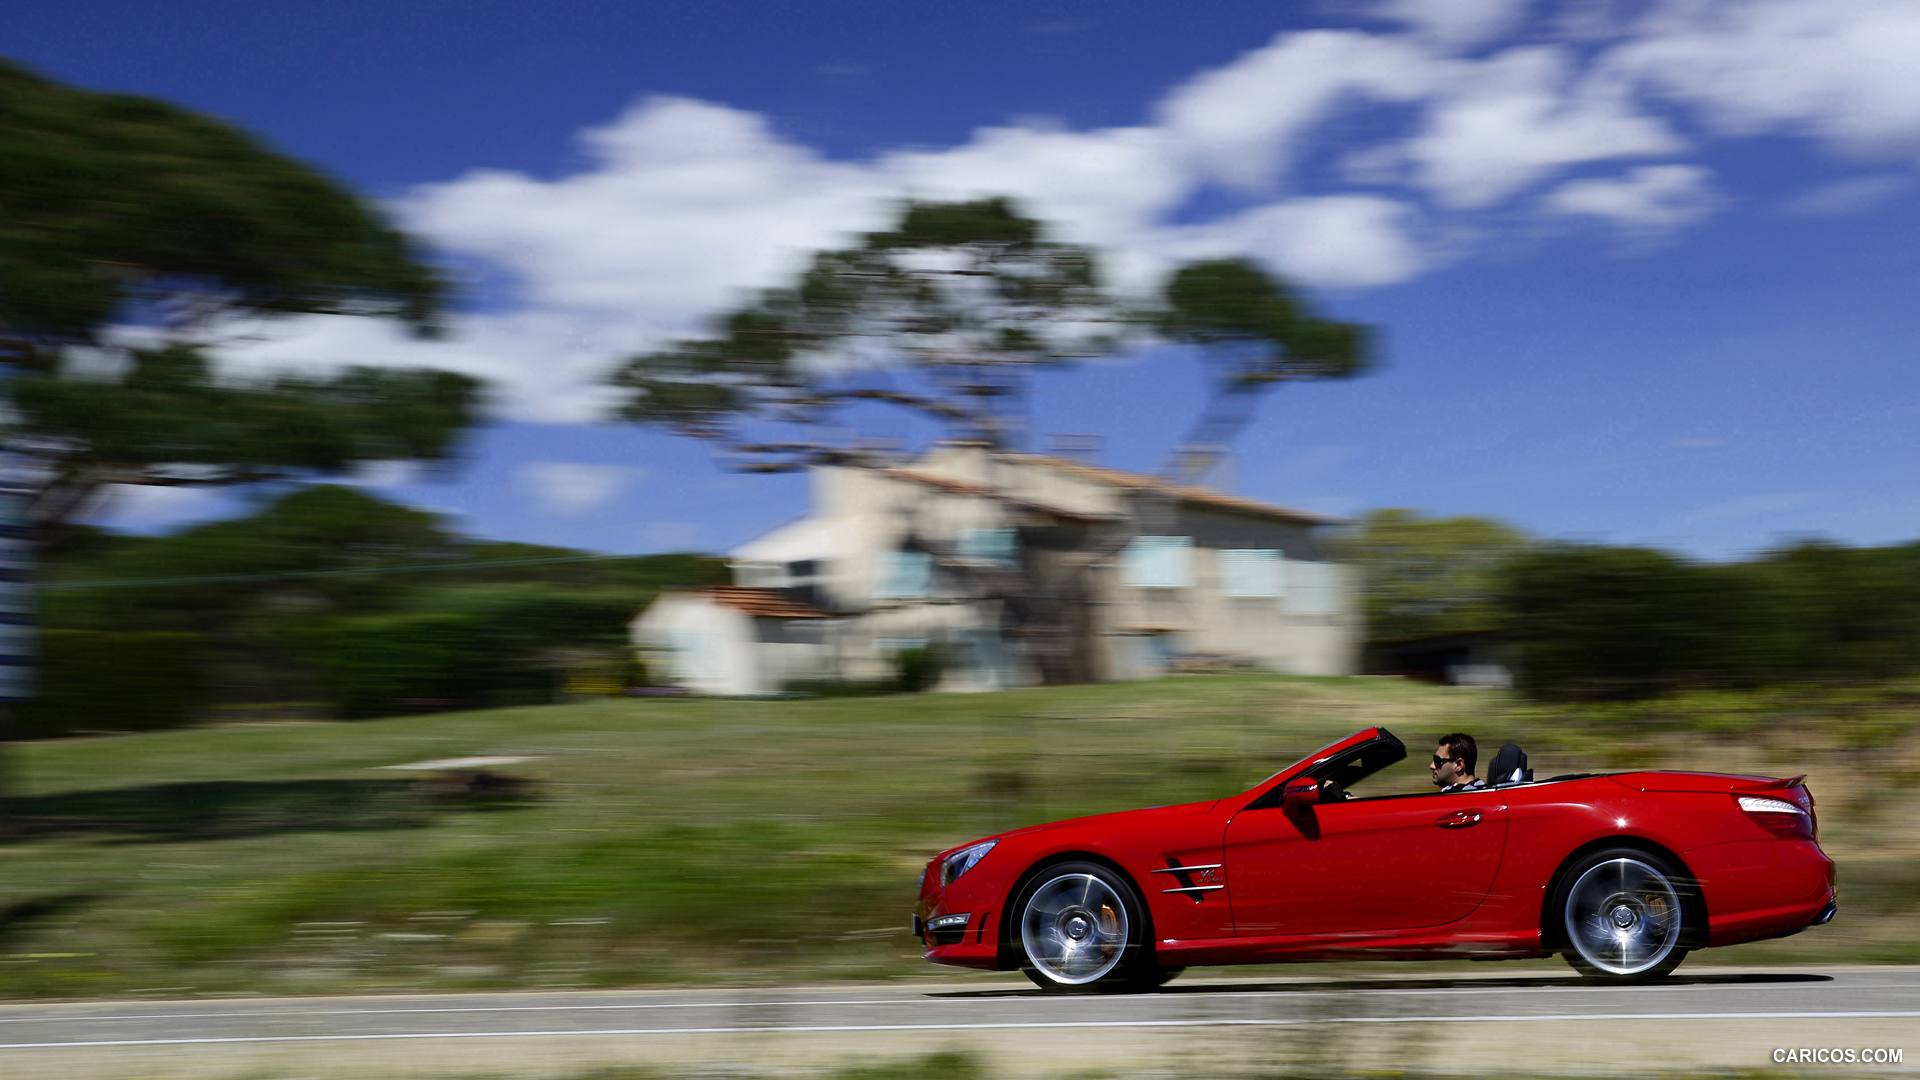 2013 Mercedes-Benz SL63 AMG Red - Side, #53 of 111